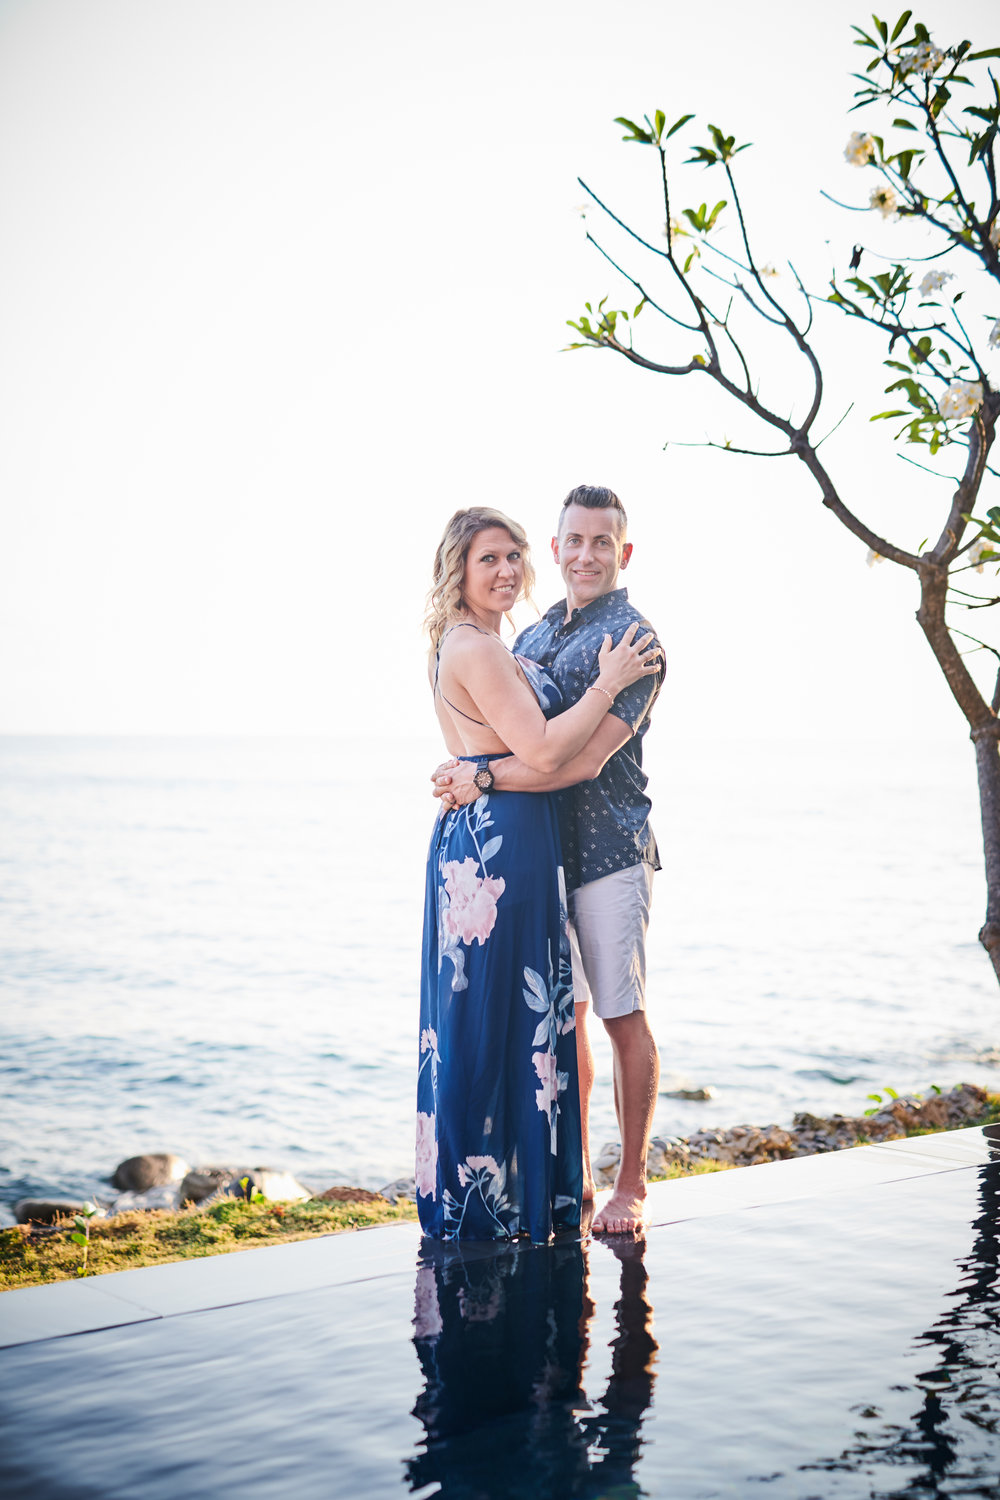 Our Flytographer photo session during our honeymoon in Thailand. Here is my Flytographer review plus a Flytographer discount code.